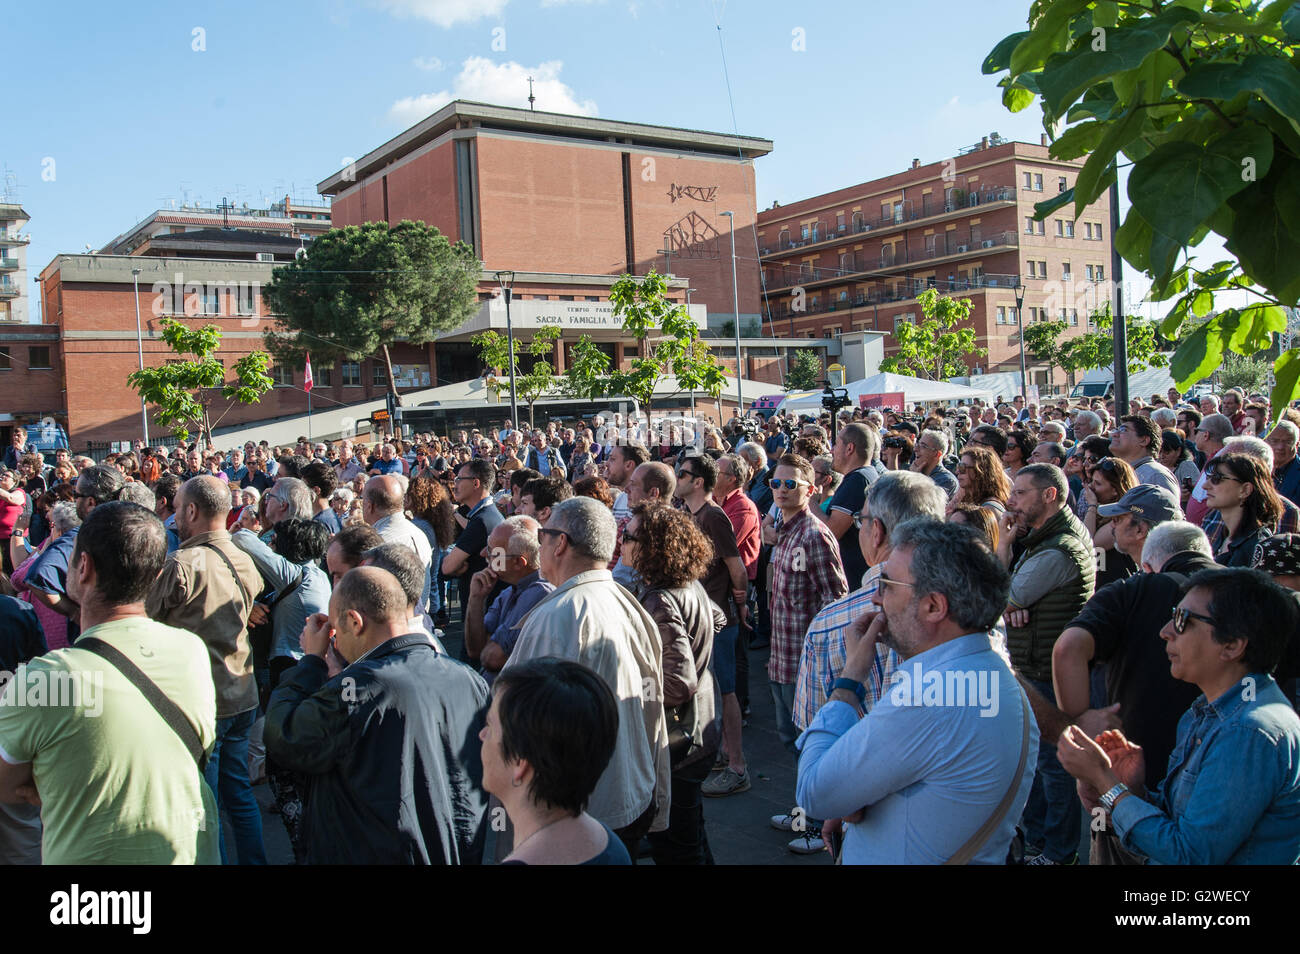 Rome, Italy. 03rd June, 2016. People attend the closing speech of Stefano Fassina candidate for mayor of Rome for the Left lists and for Civic Fassina Mayor, in the popular neighborhood of Centocelle. © Leo Claudio De Petris/Pacific Press/Alamy Live News Stock Photo